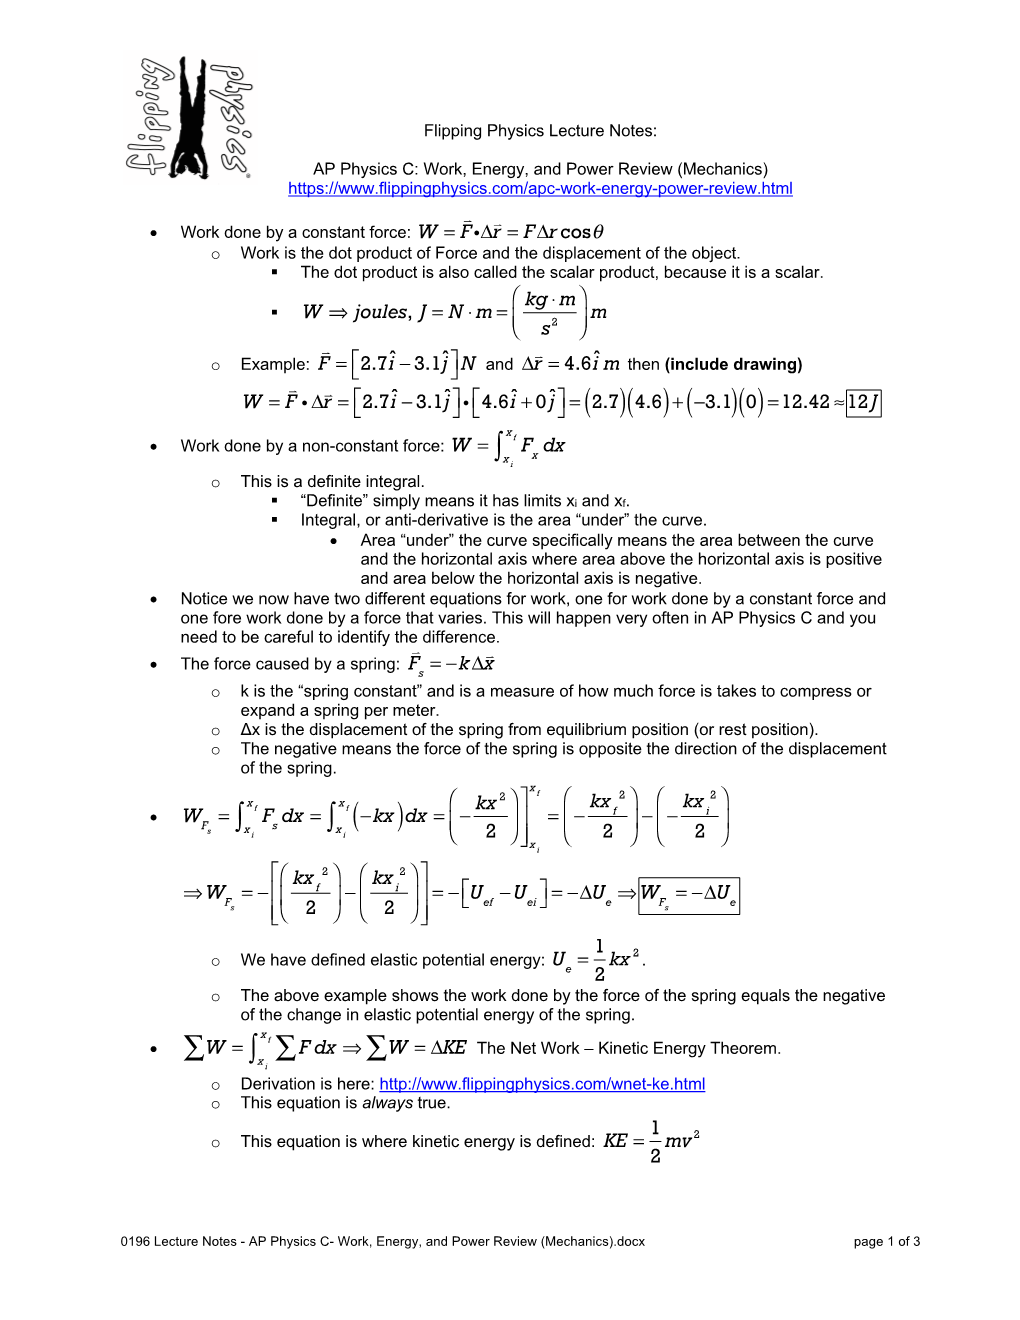 0196 Lecture Notes - AP Physics C- Work, Energy, and Power Review (Mechanics).Docx Page 1 of 3